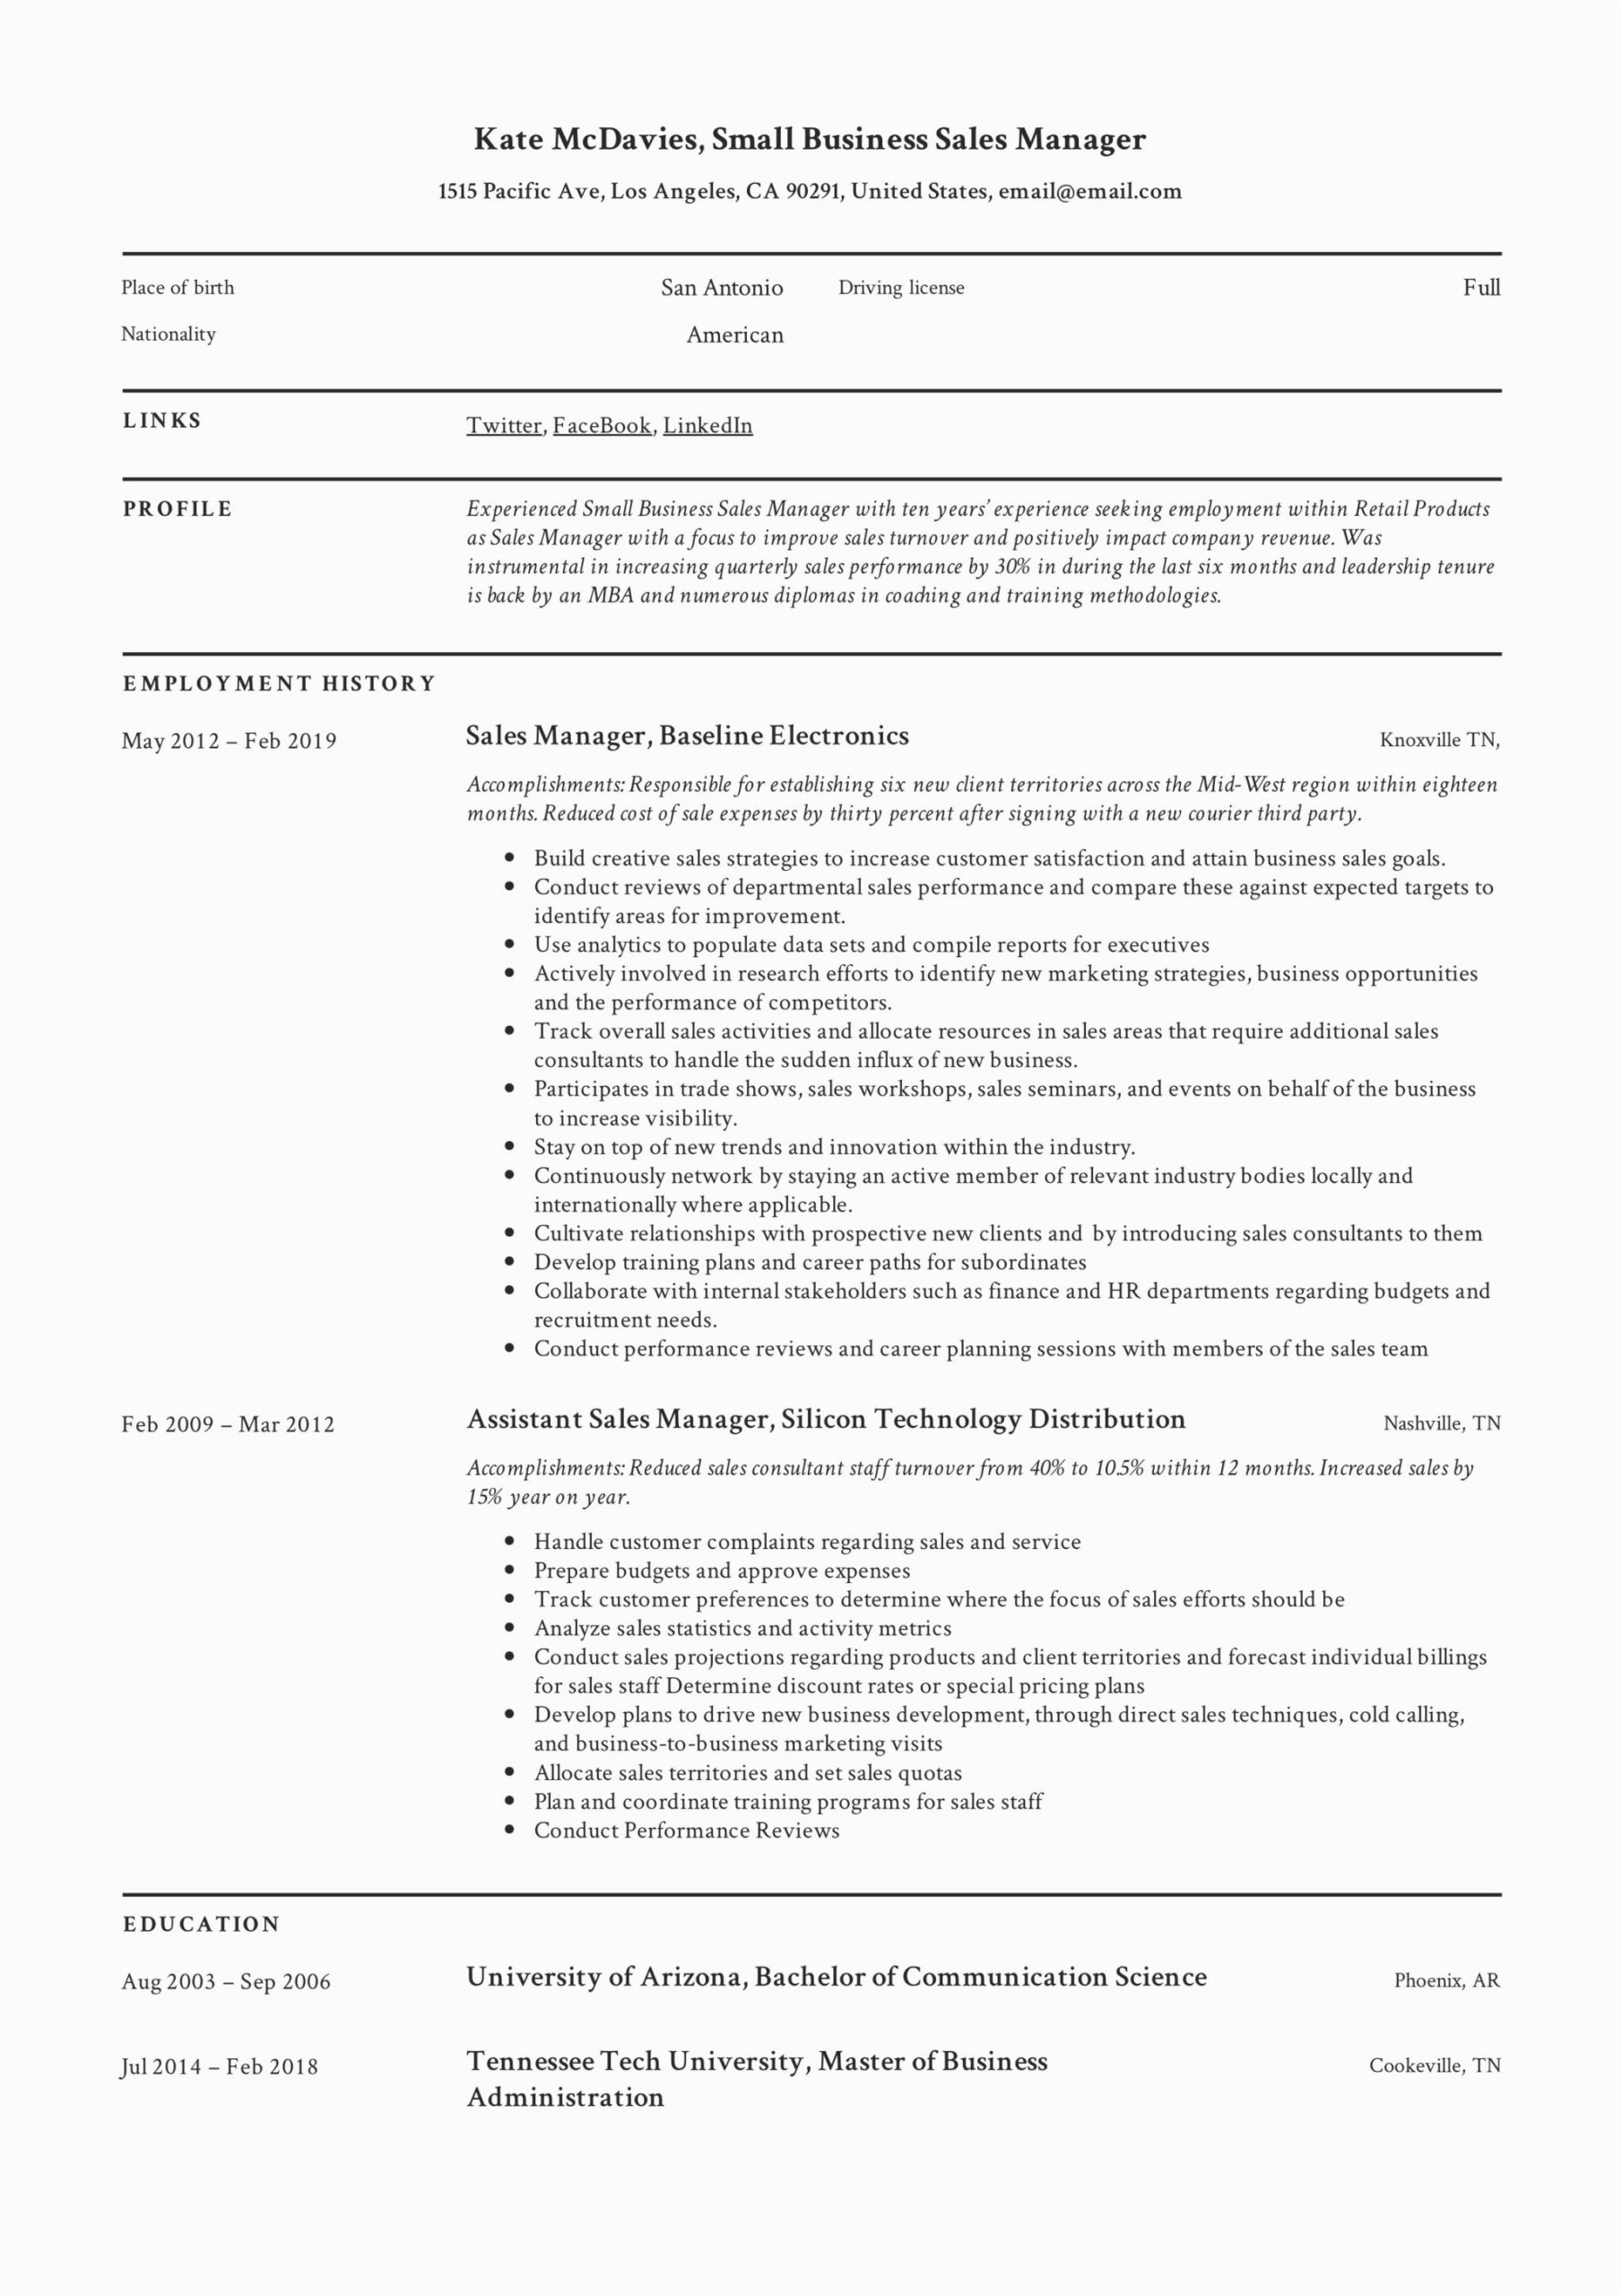 Free Sample Of A Sales Resume Guide Small Business Sales Manager Resume [x12] Sample Pdf